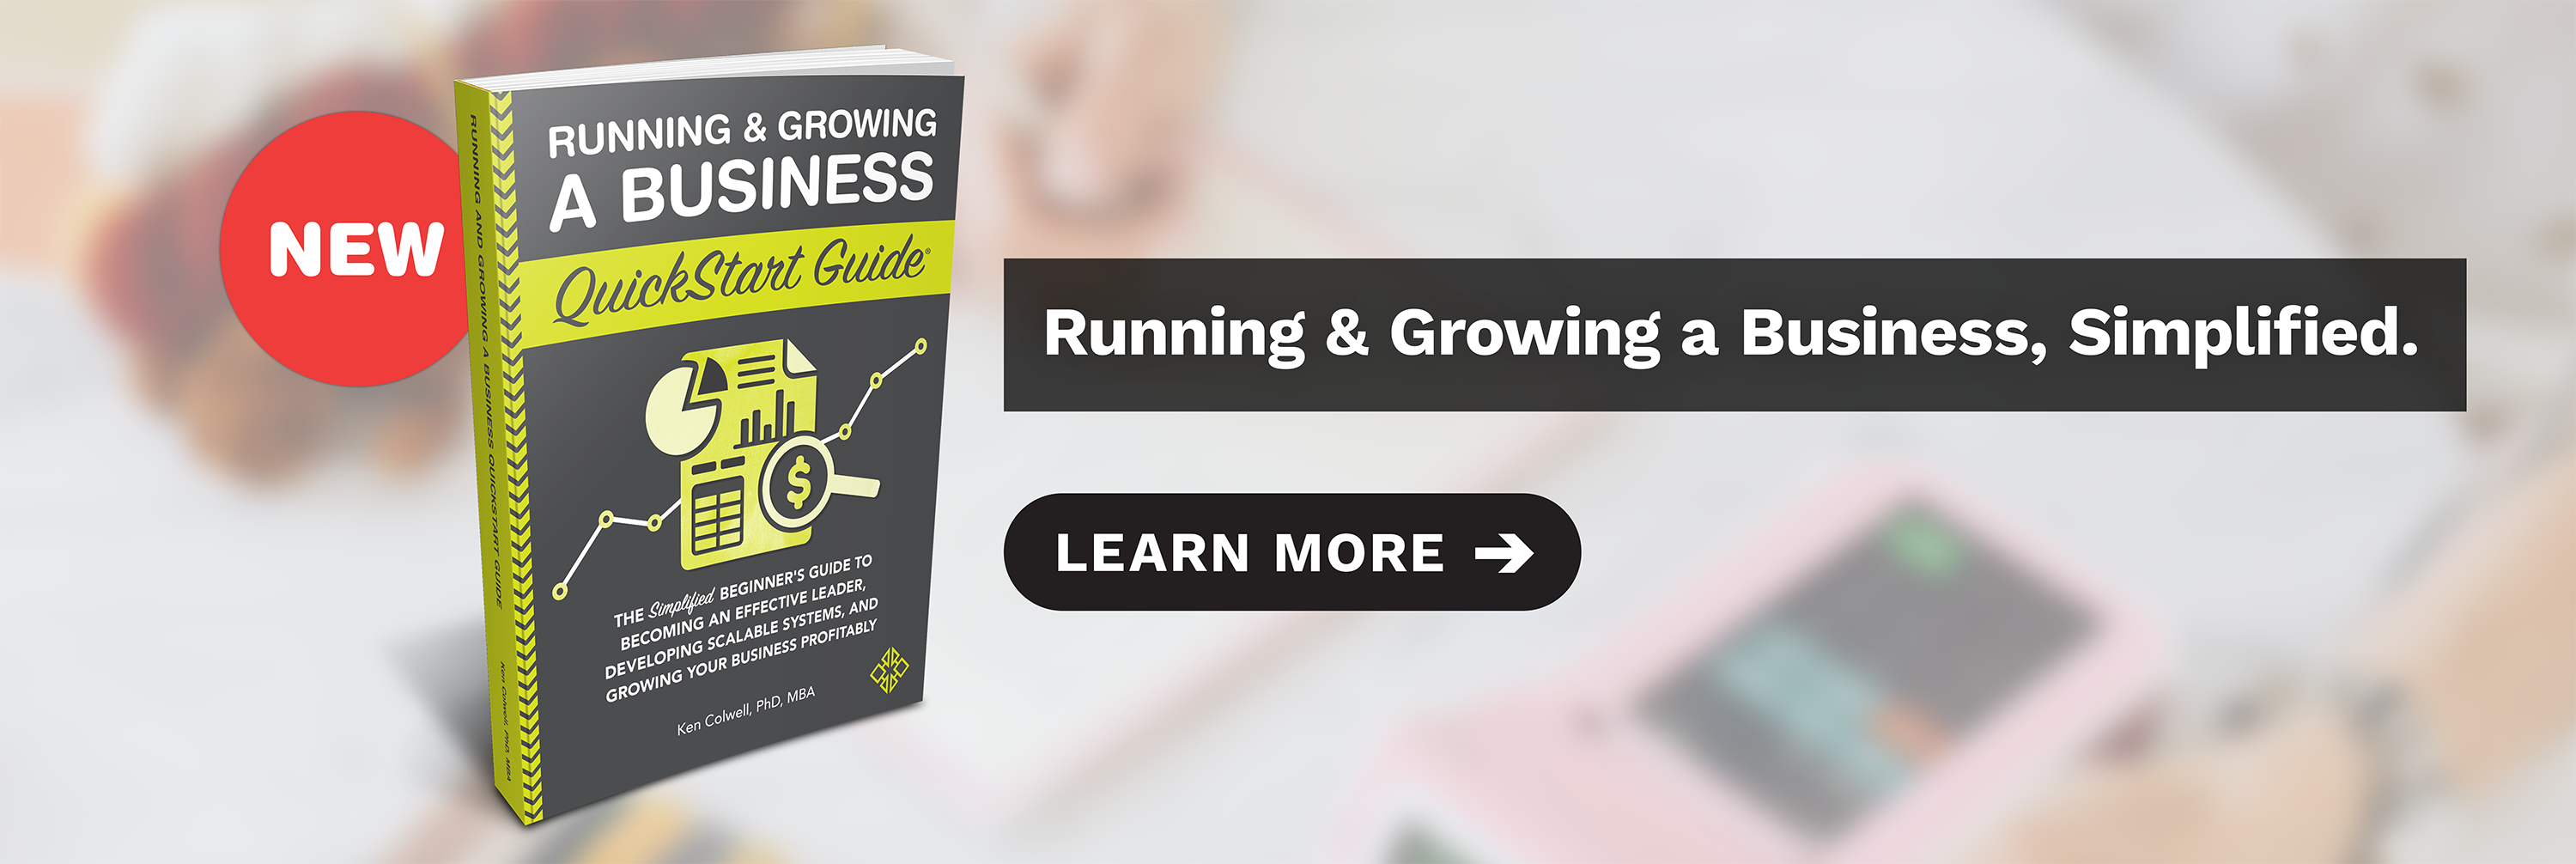 Available now! Running & Growing a Business QuickStart Guide by veteran entrepreneur Ken Colwell, PhD, MBA